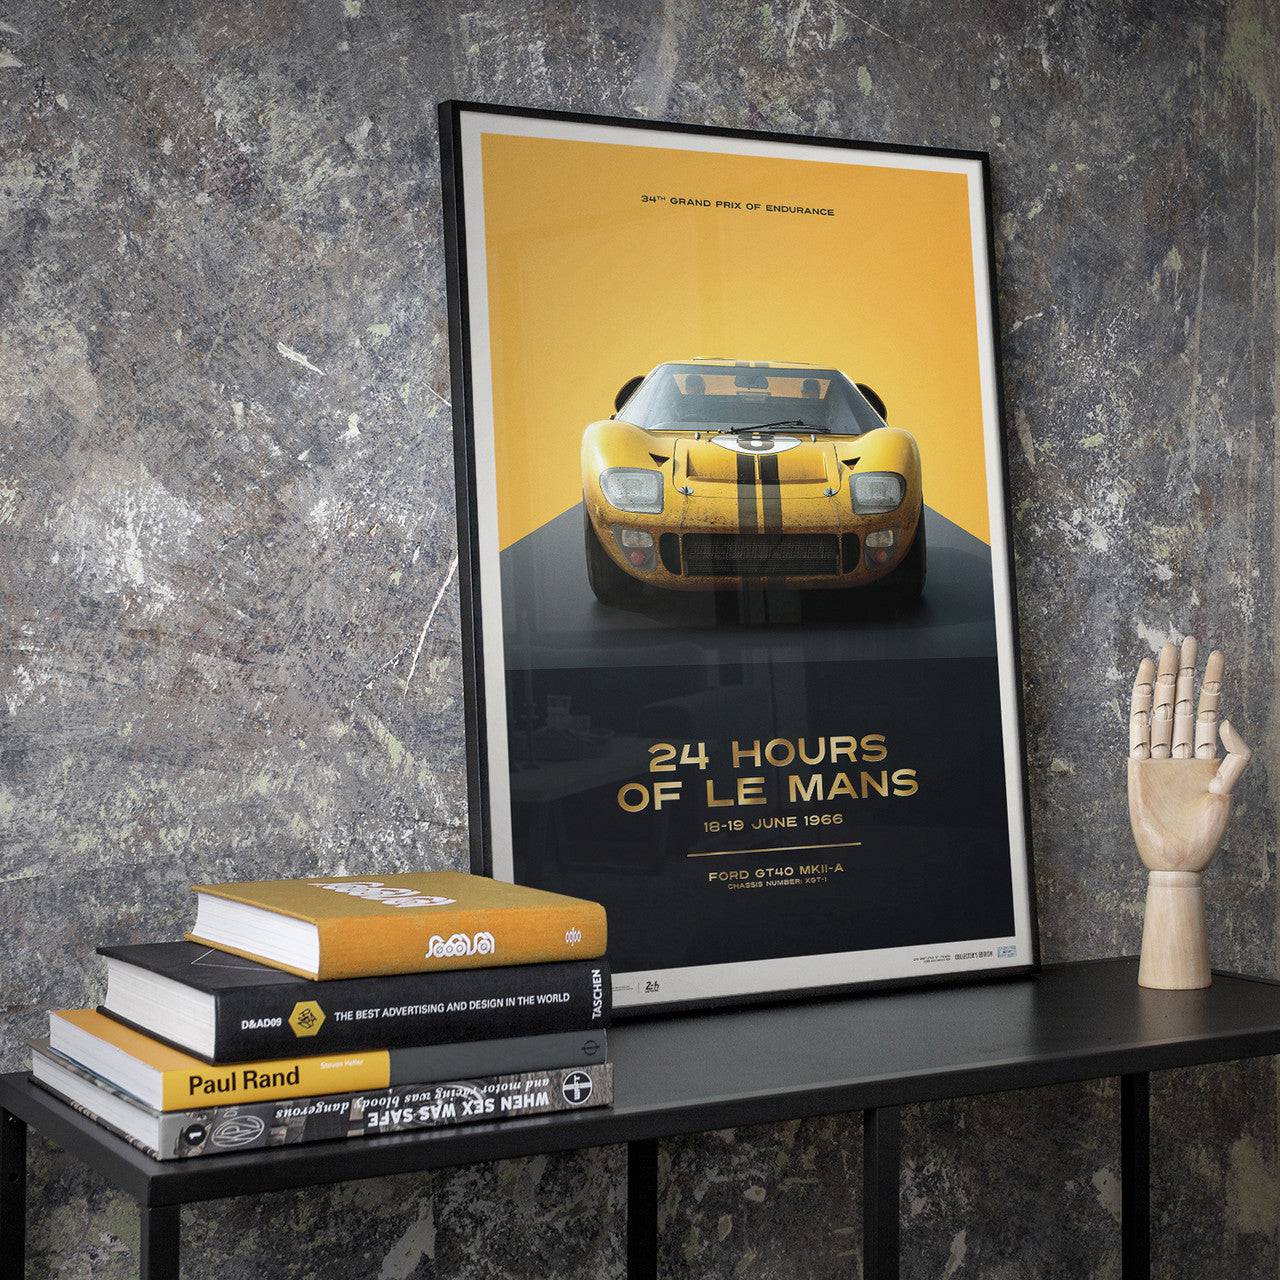 Ford GT40 - XGT-1 - 24H Le Mans - 1966 | Collector’s Edition | Poster